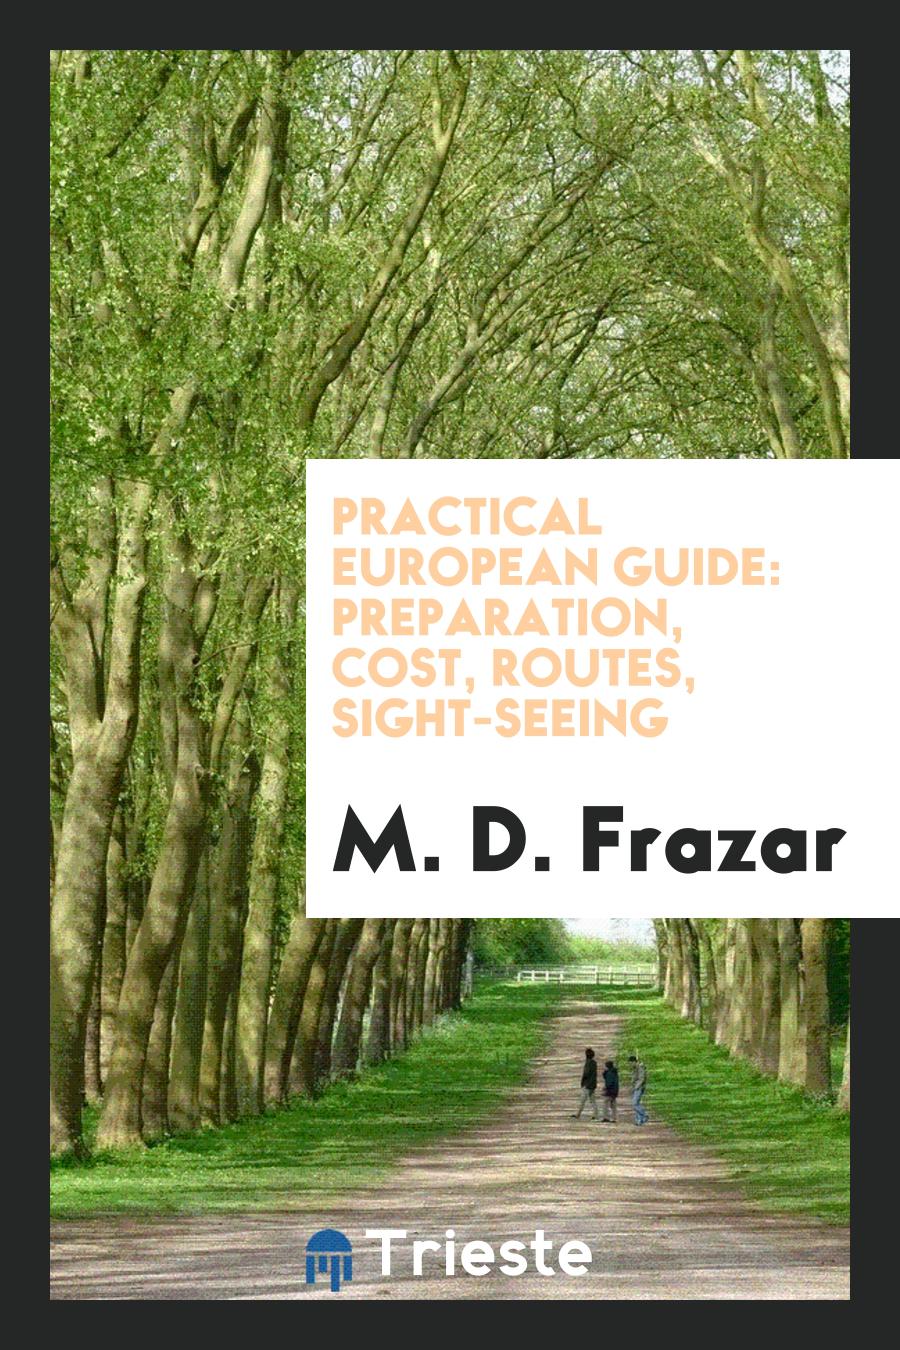 Practical European guide: preparation, cost, routes, sight-seeing